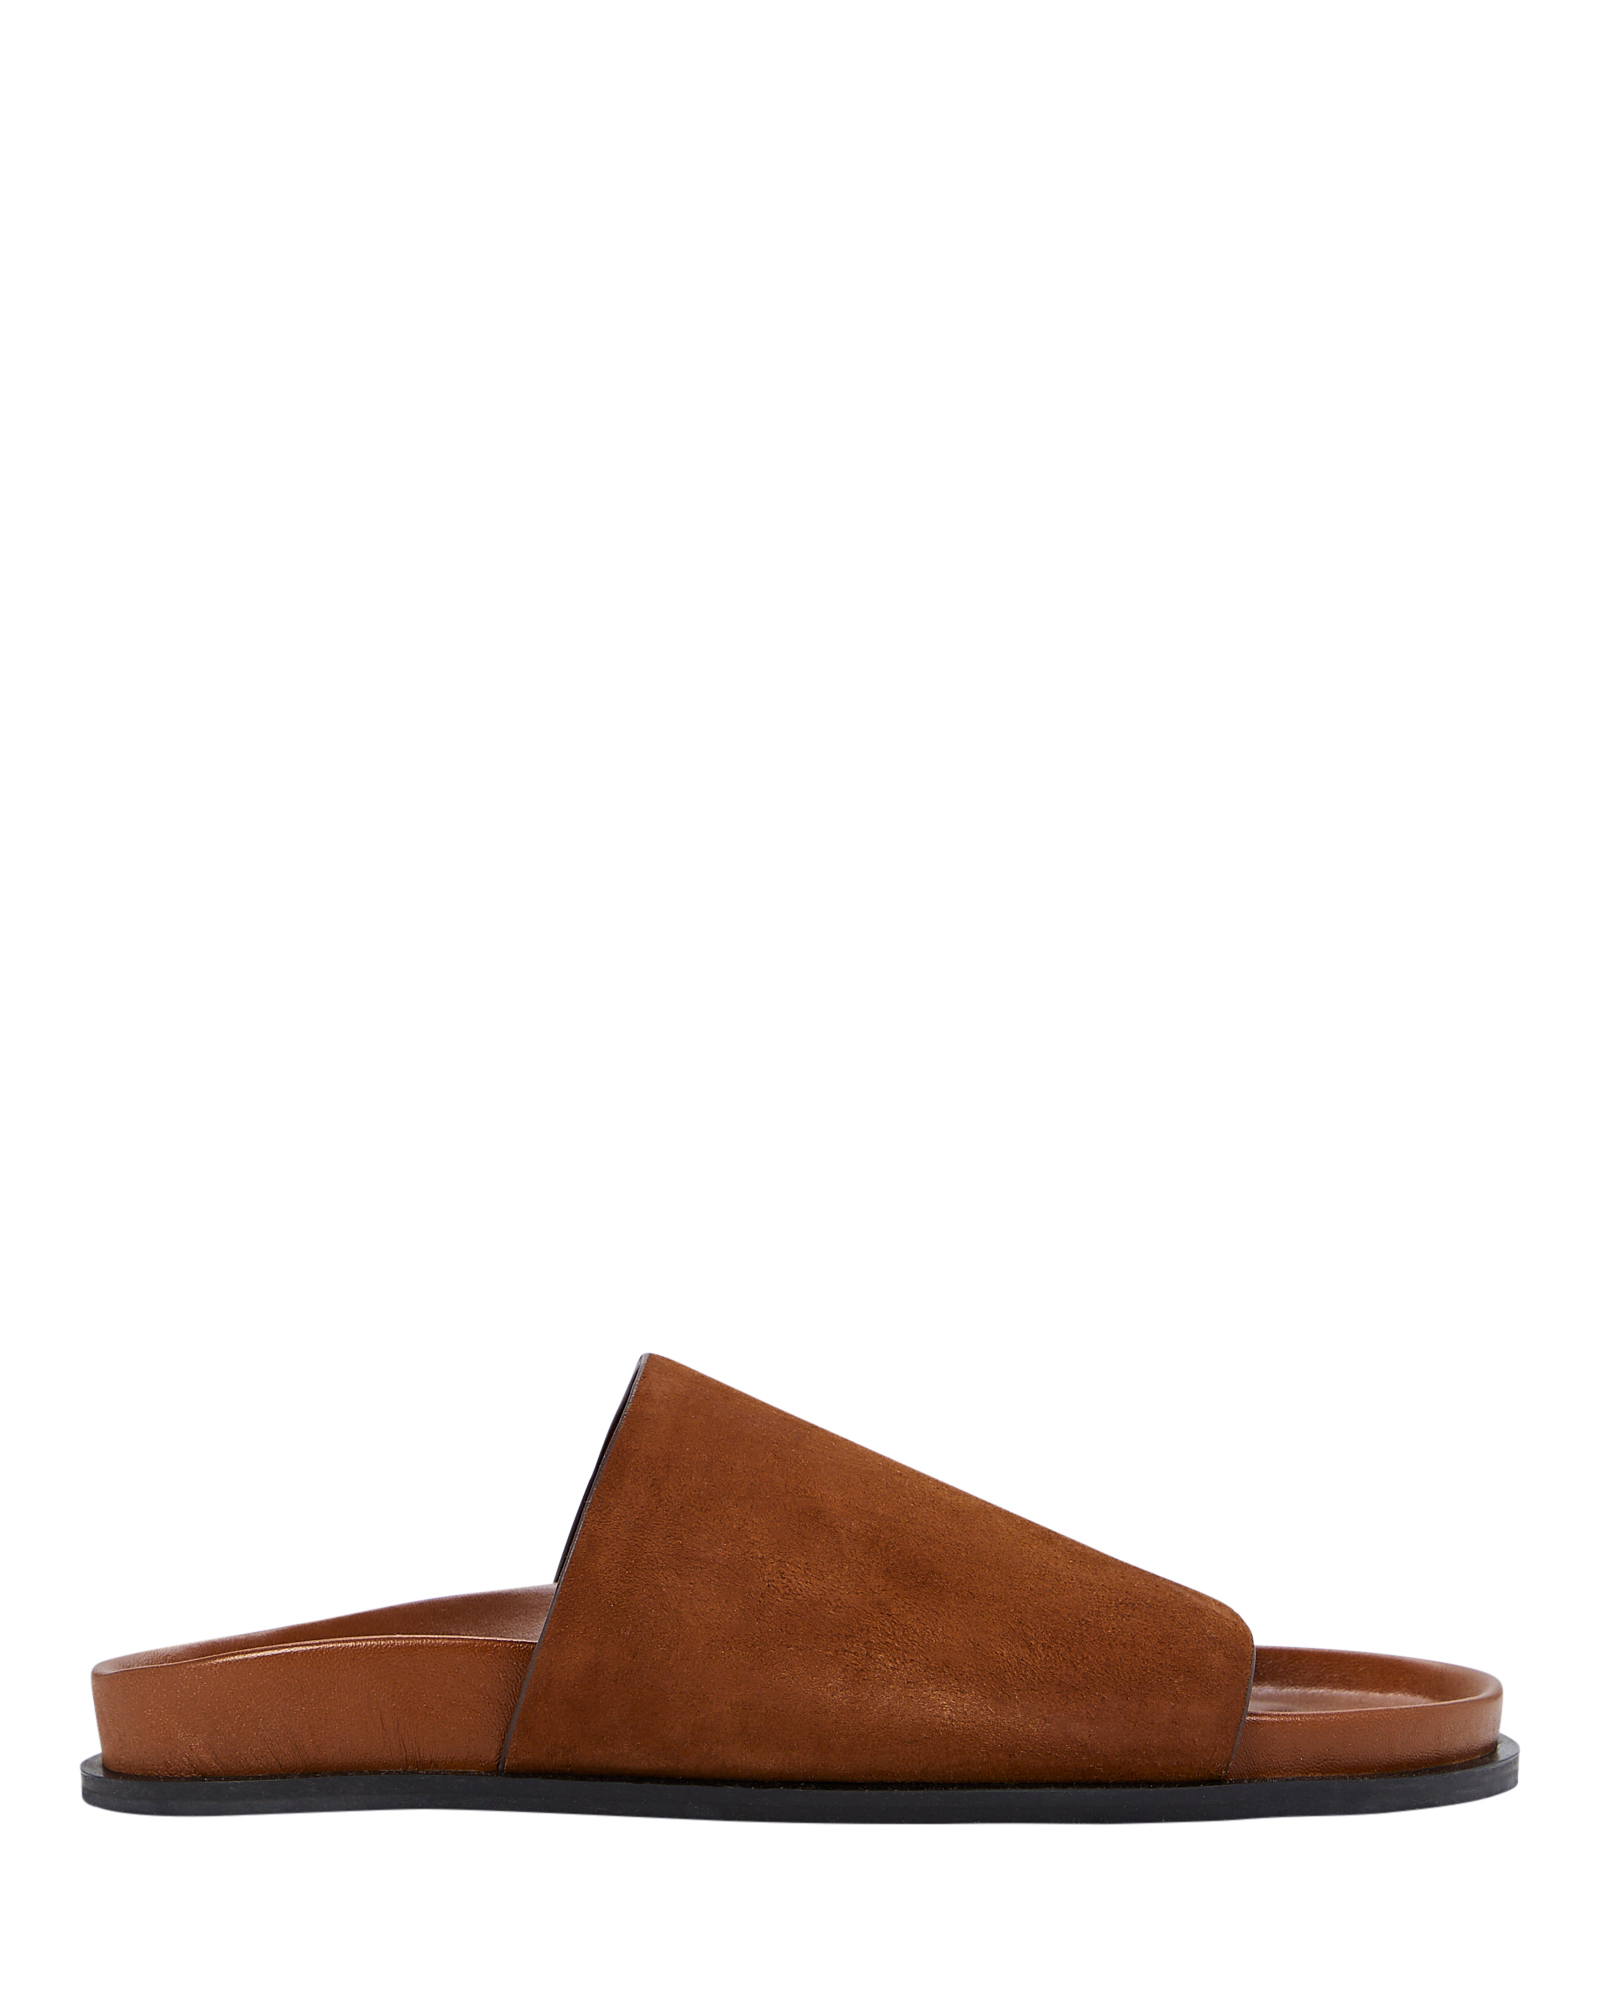 A.EMERY LUCA LEATHER SLIDE SANDALS